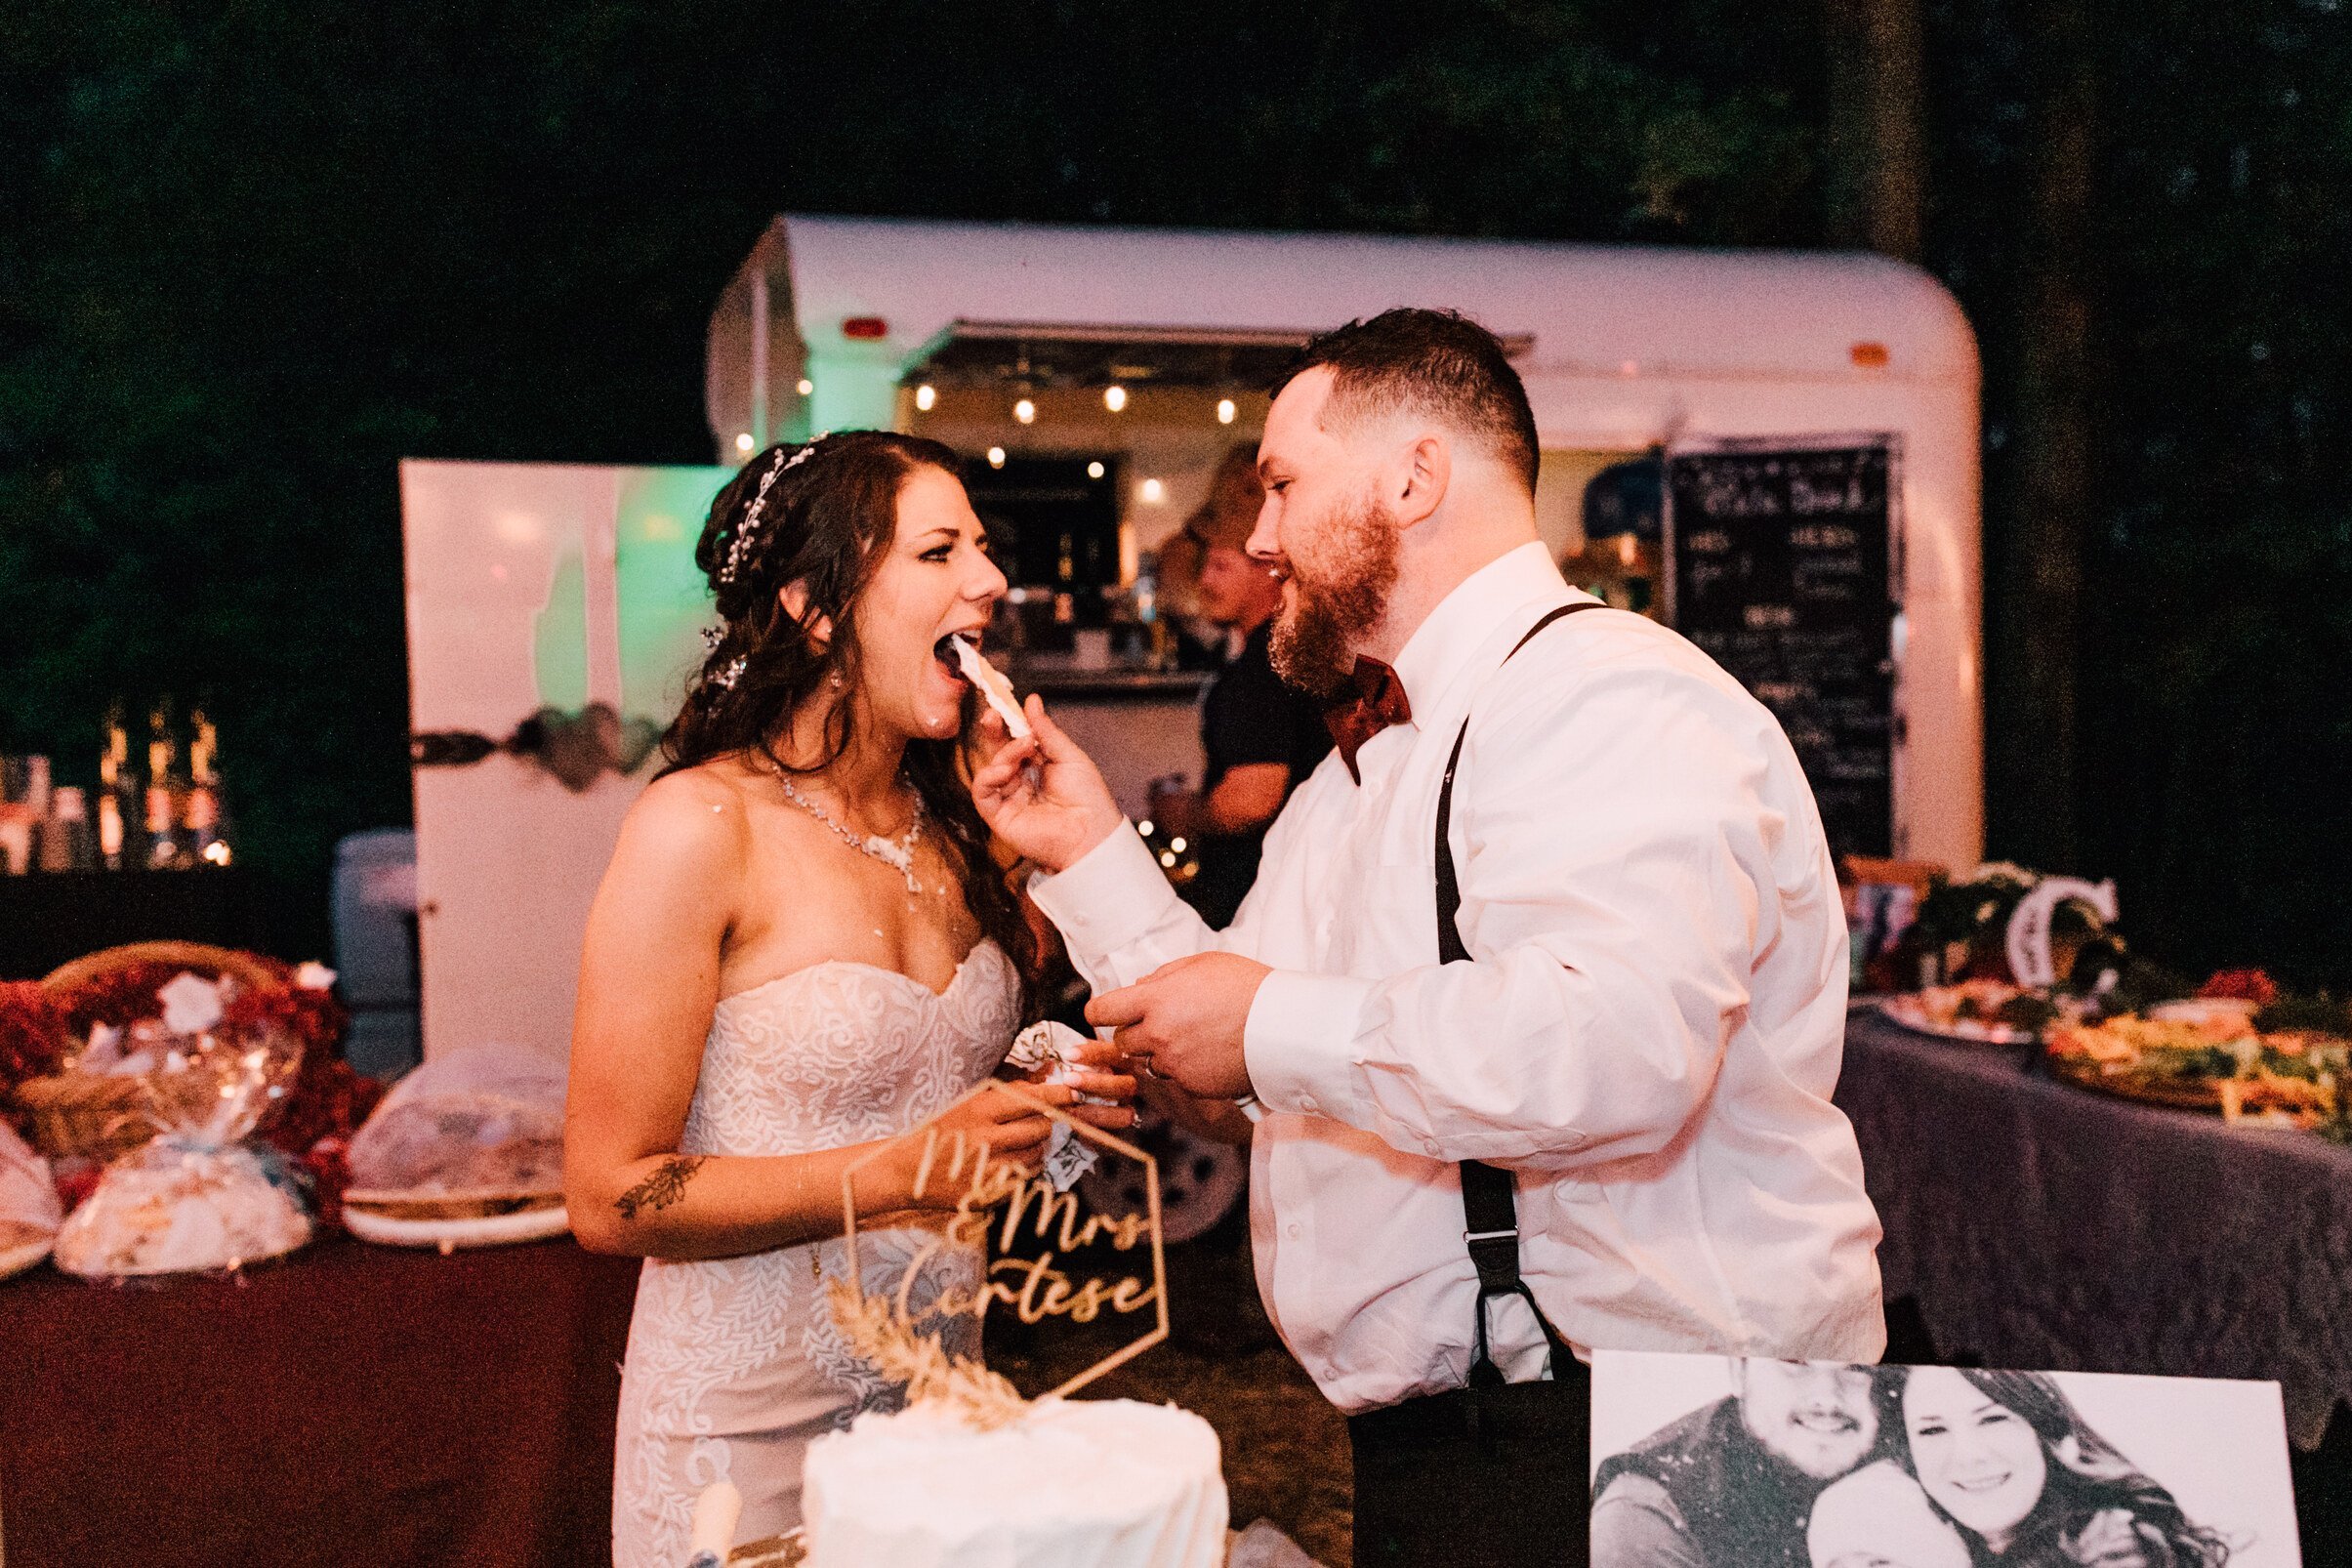  The groom feeds the bride a piece of cake at their backyard wedding reception 